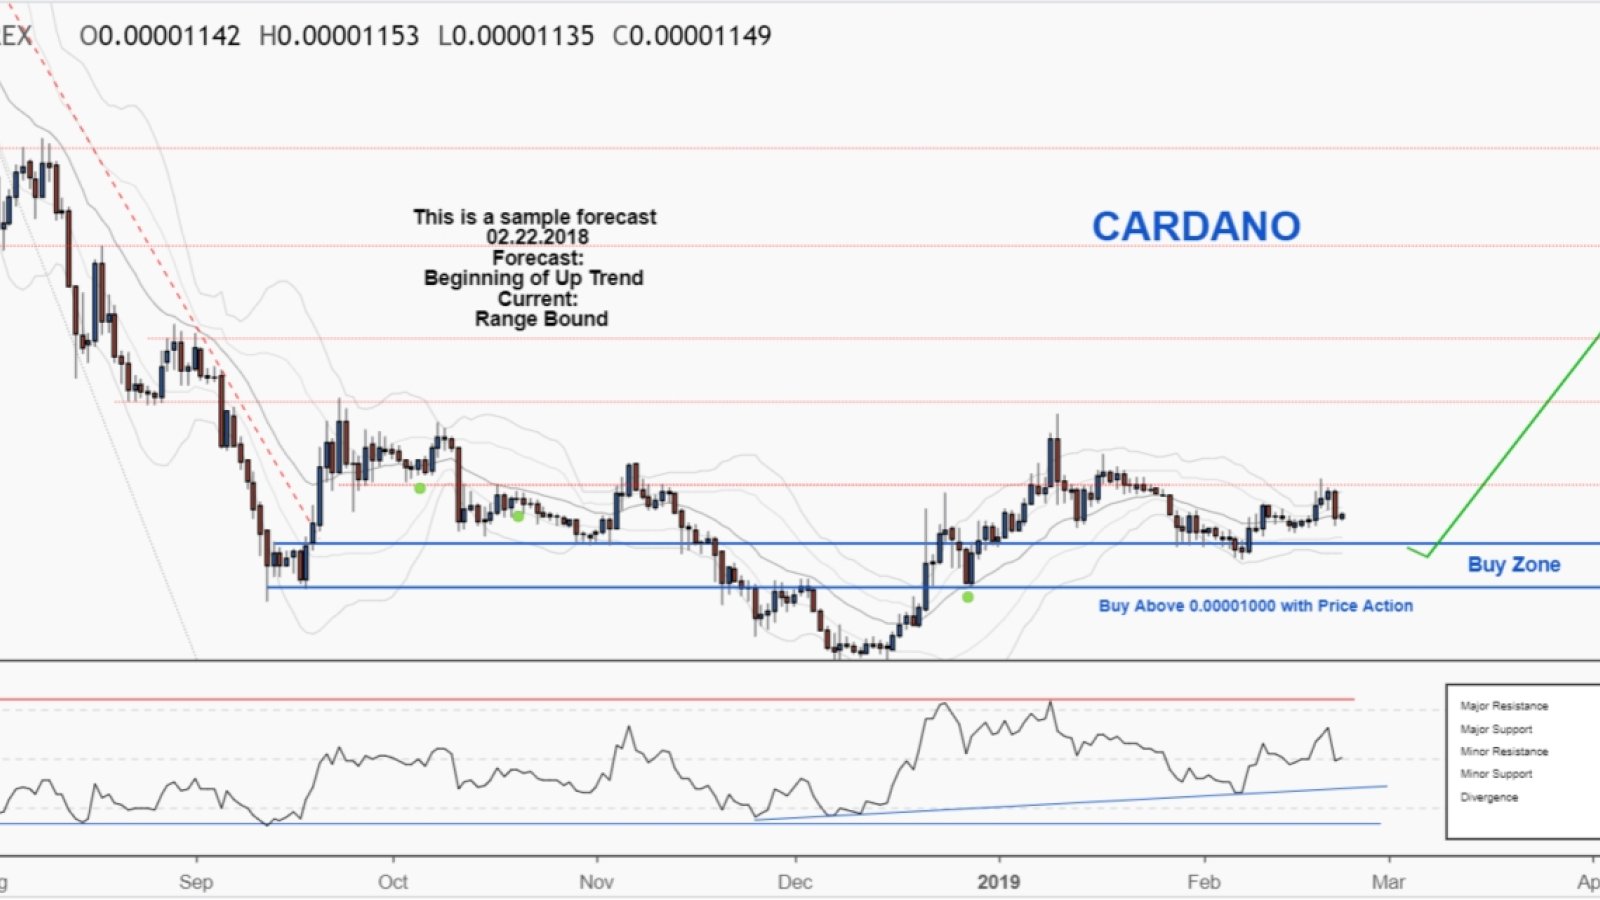 Don’t miss the Buy Zone – watch for reversal trends